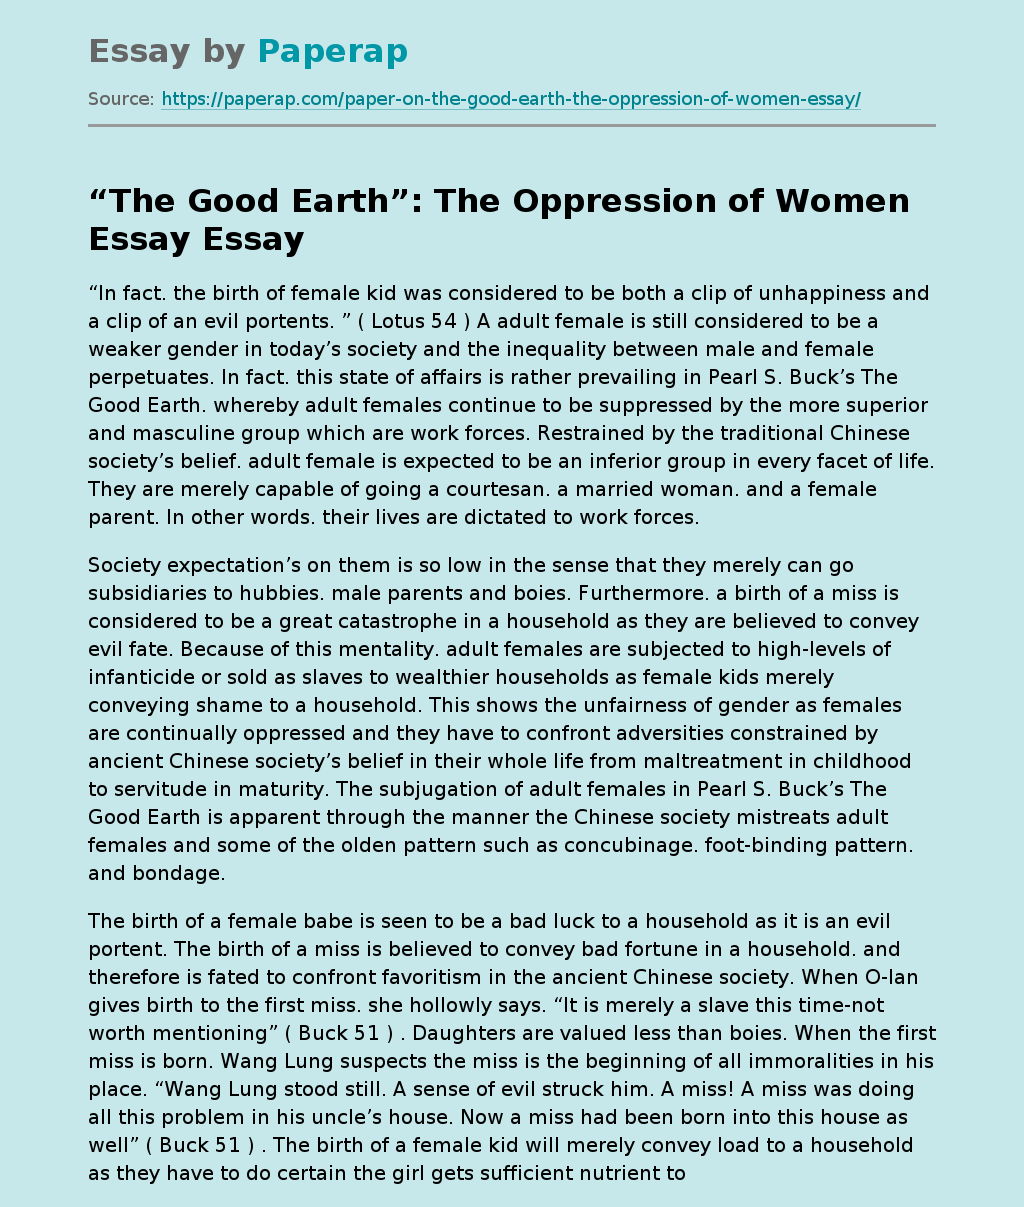 “The Good Earth”: The Oppression of Women Essay